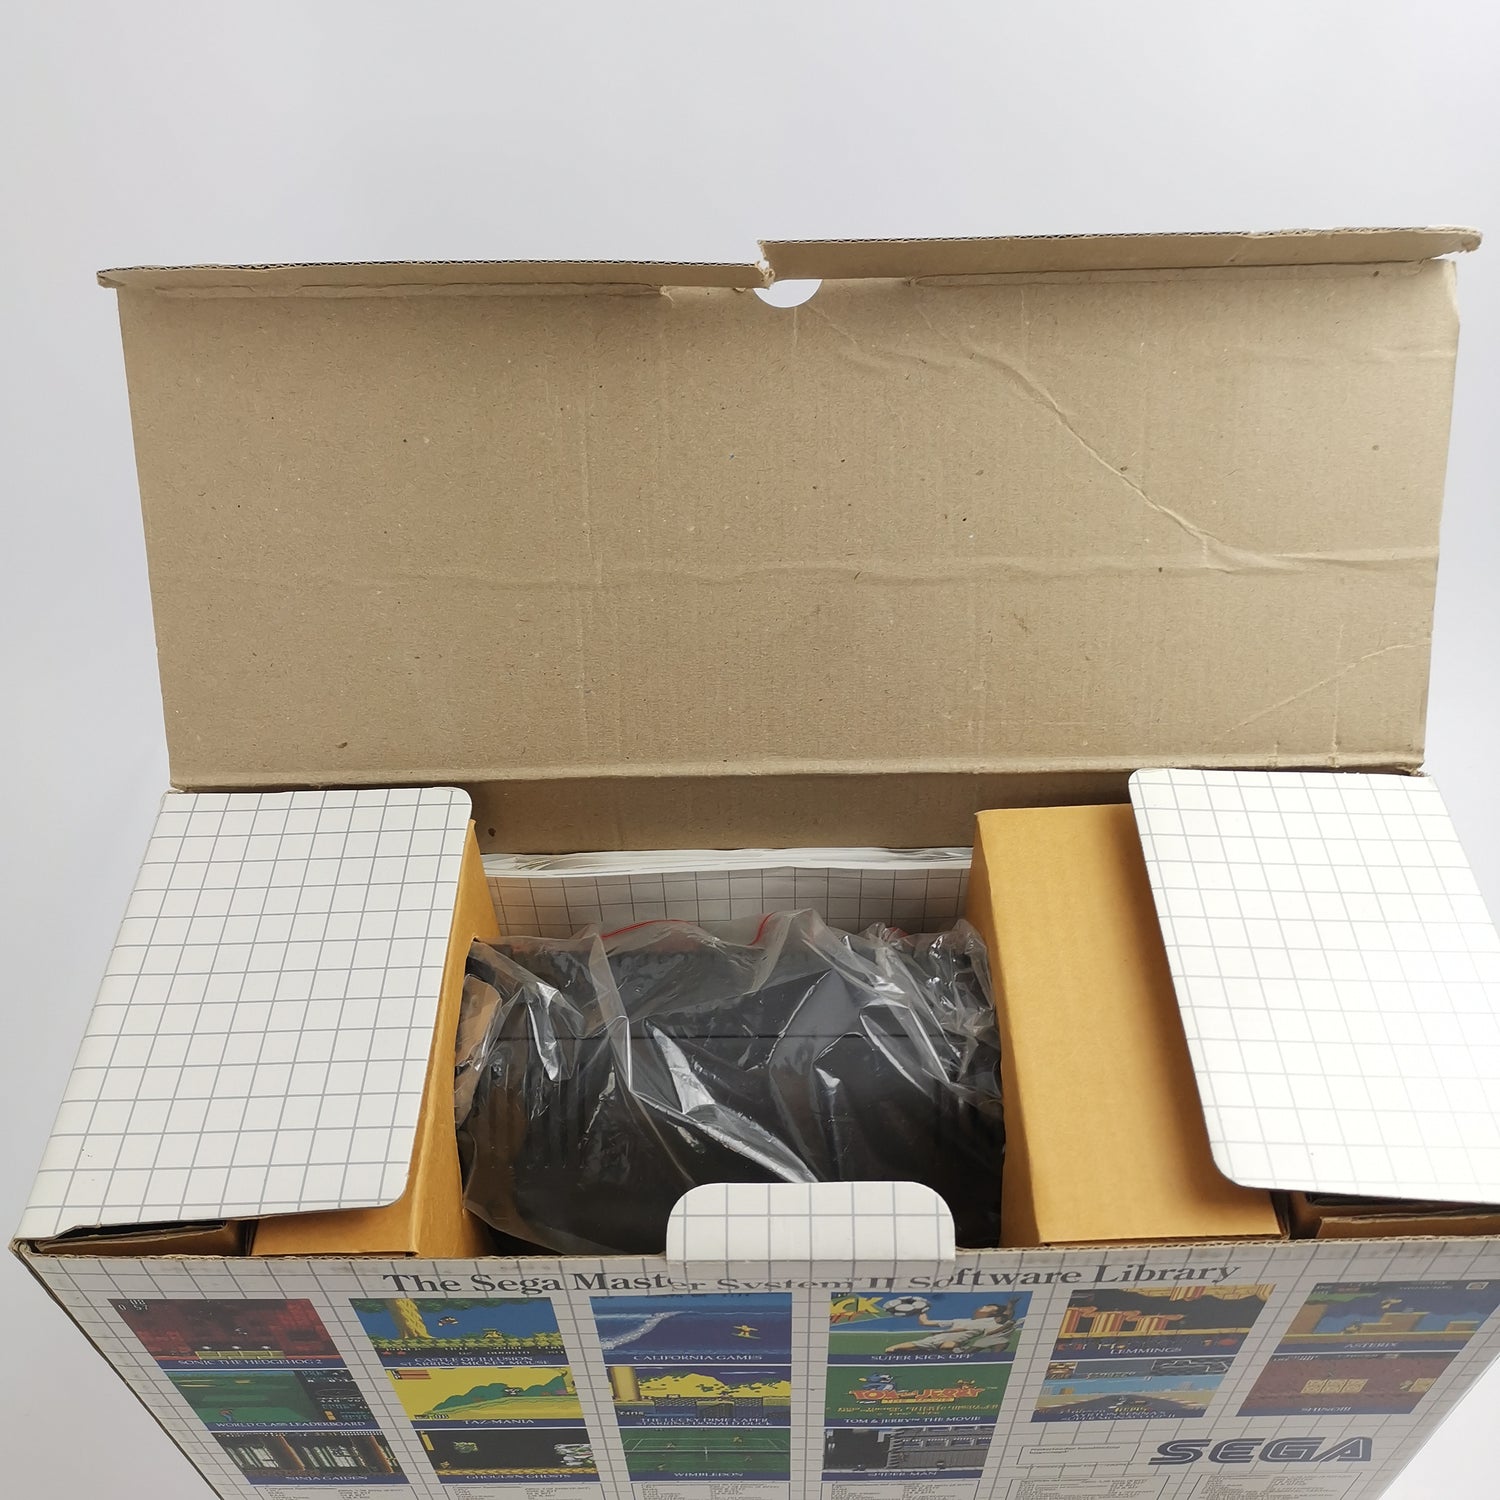 Sega Master System II 2 Console includes Sonic The Hedgehog | PAL Console - original packaging